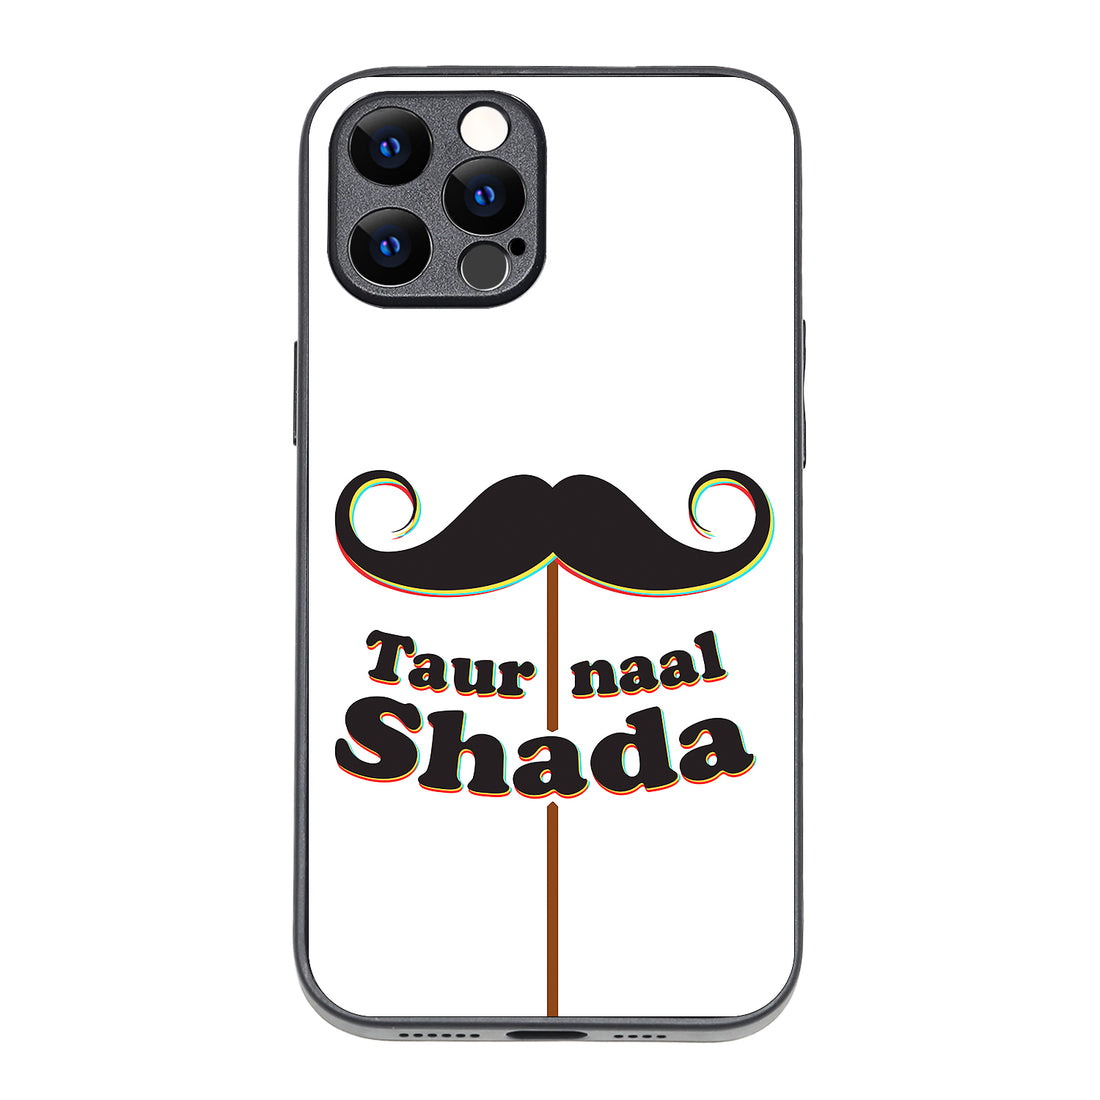 Taur Naal Shada Motivational Quotes iPhone 12 Pro Max Case